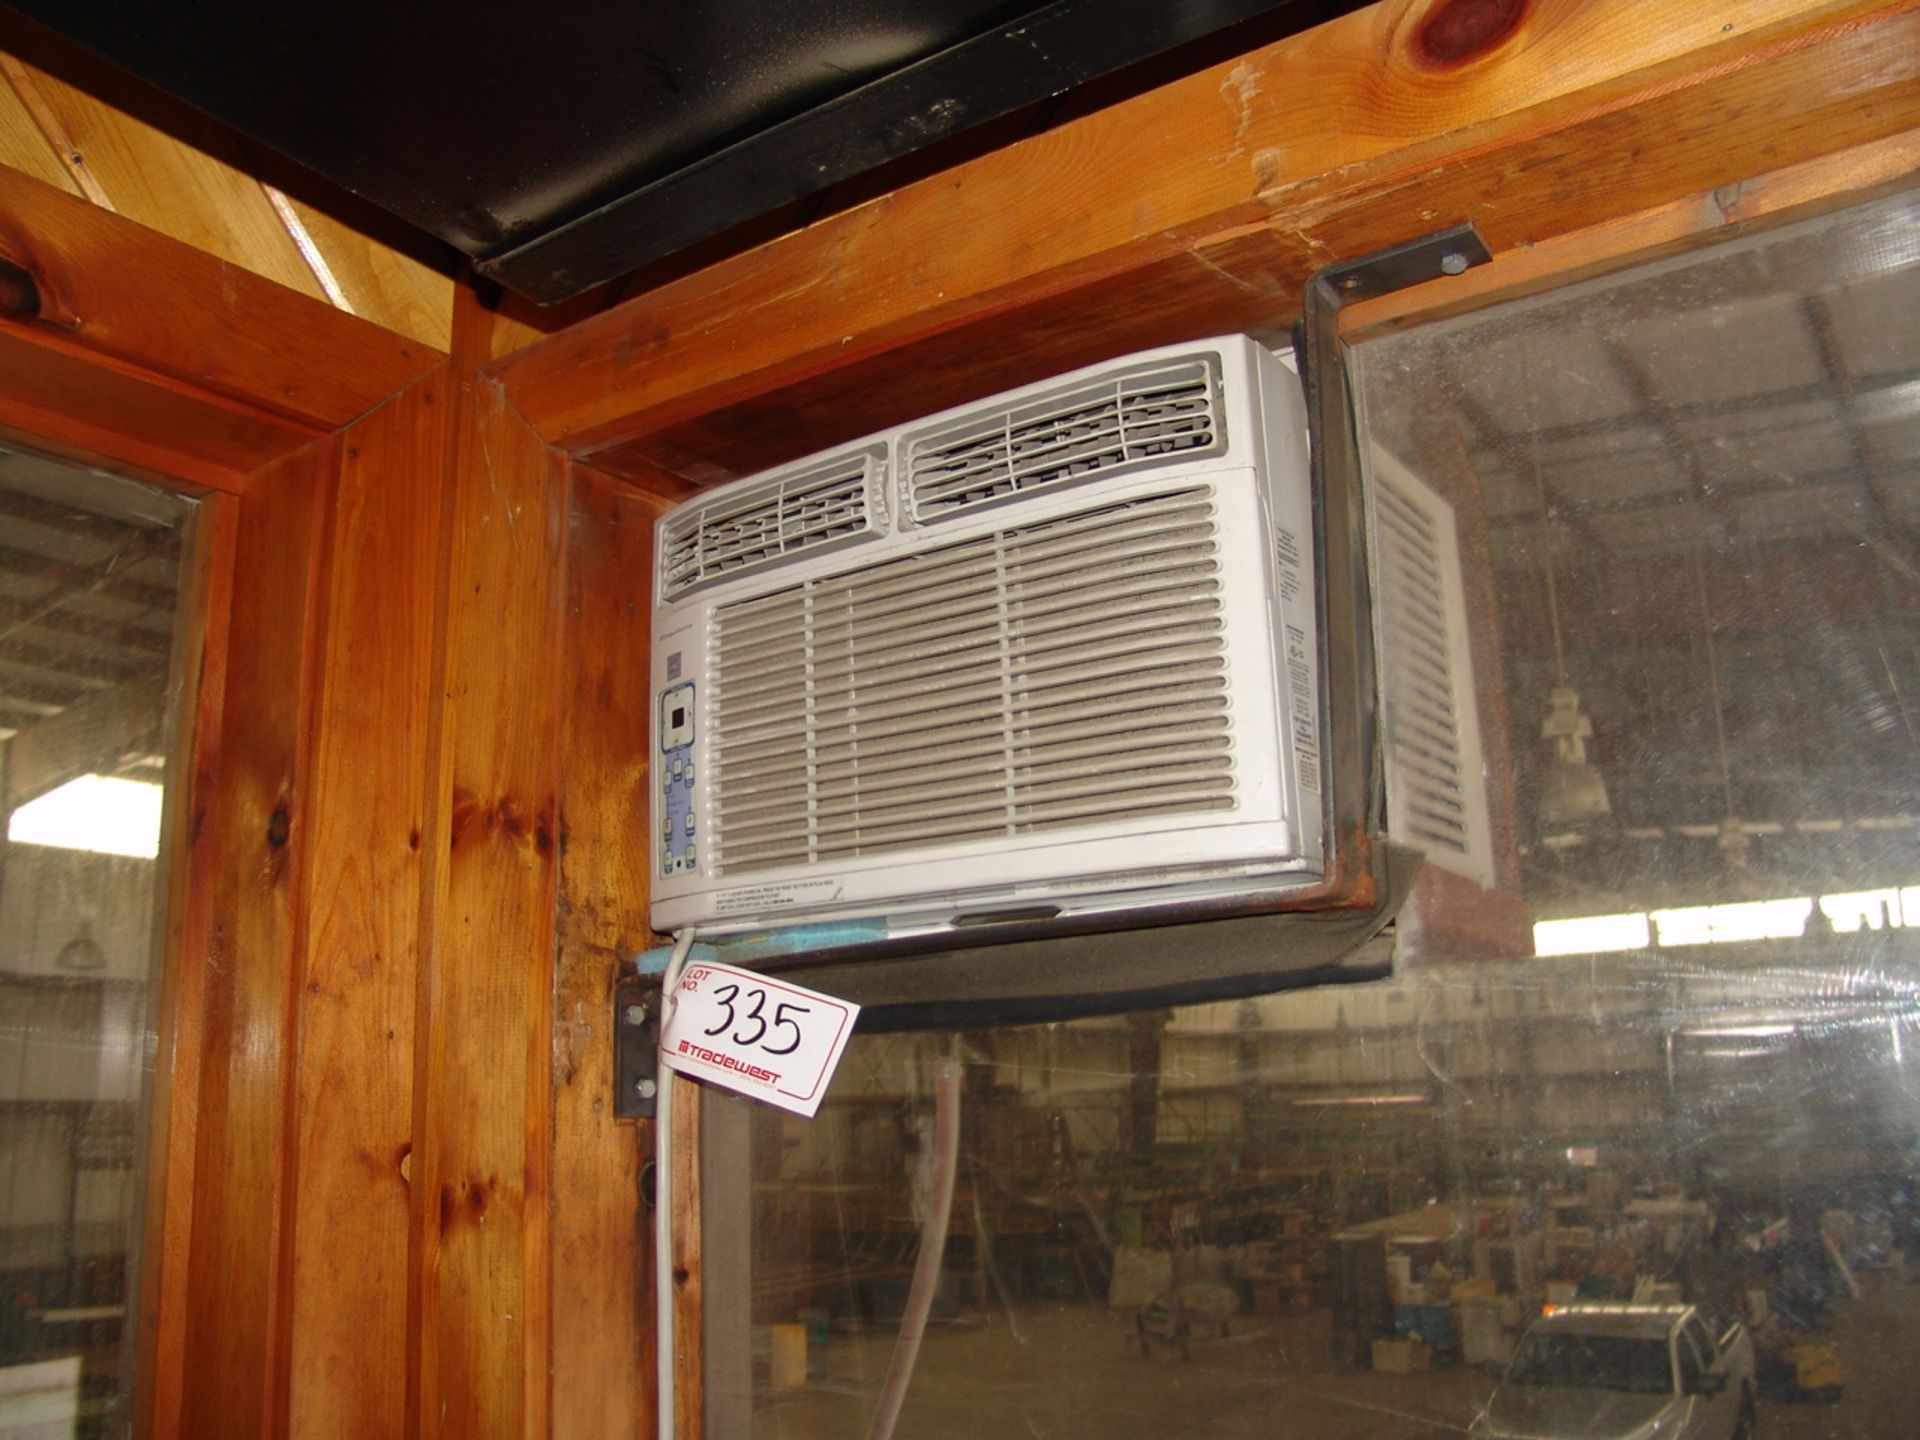 (2) AIR CONDITIONING UNITS